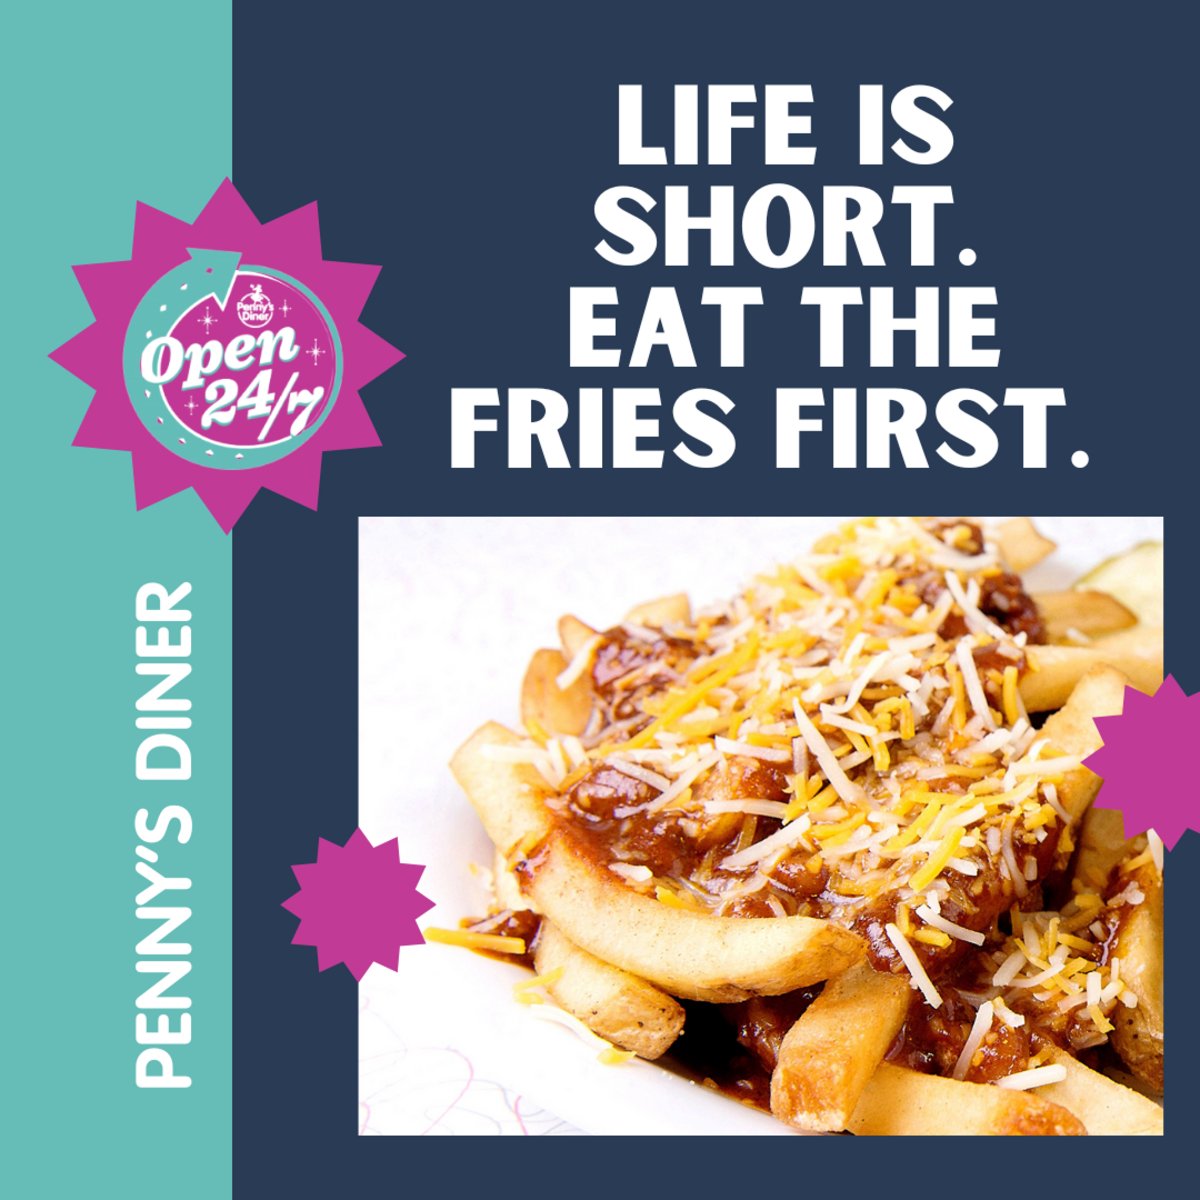 Like we always say at Penny's Diner Cheyenne, chili cheese the day! Stop by and kick off your feast with a basket of our legendary #chilicheesefries. Get 'em while they're hot!🔥🍟 #PennysDiner